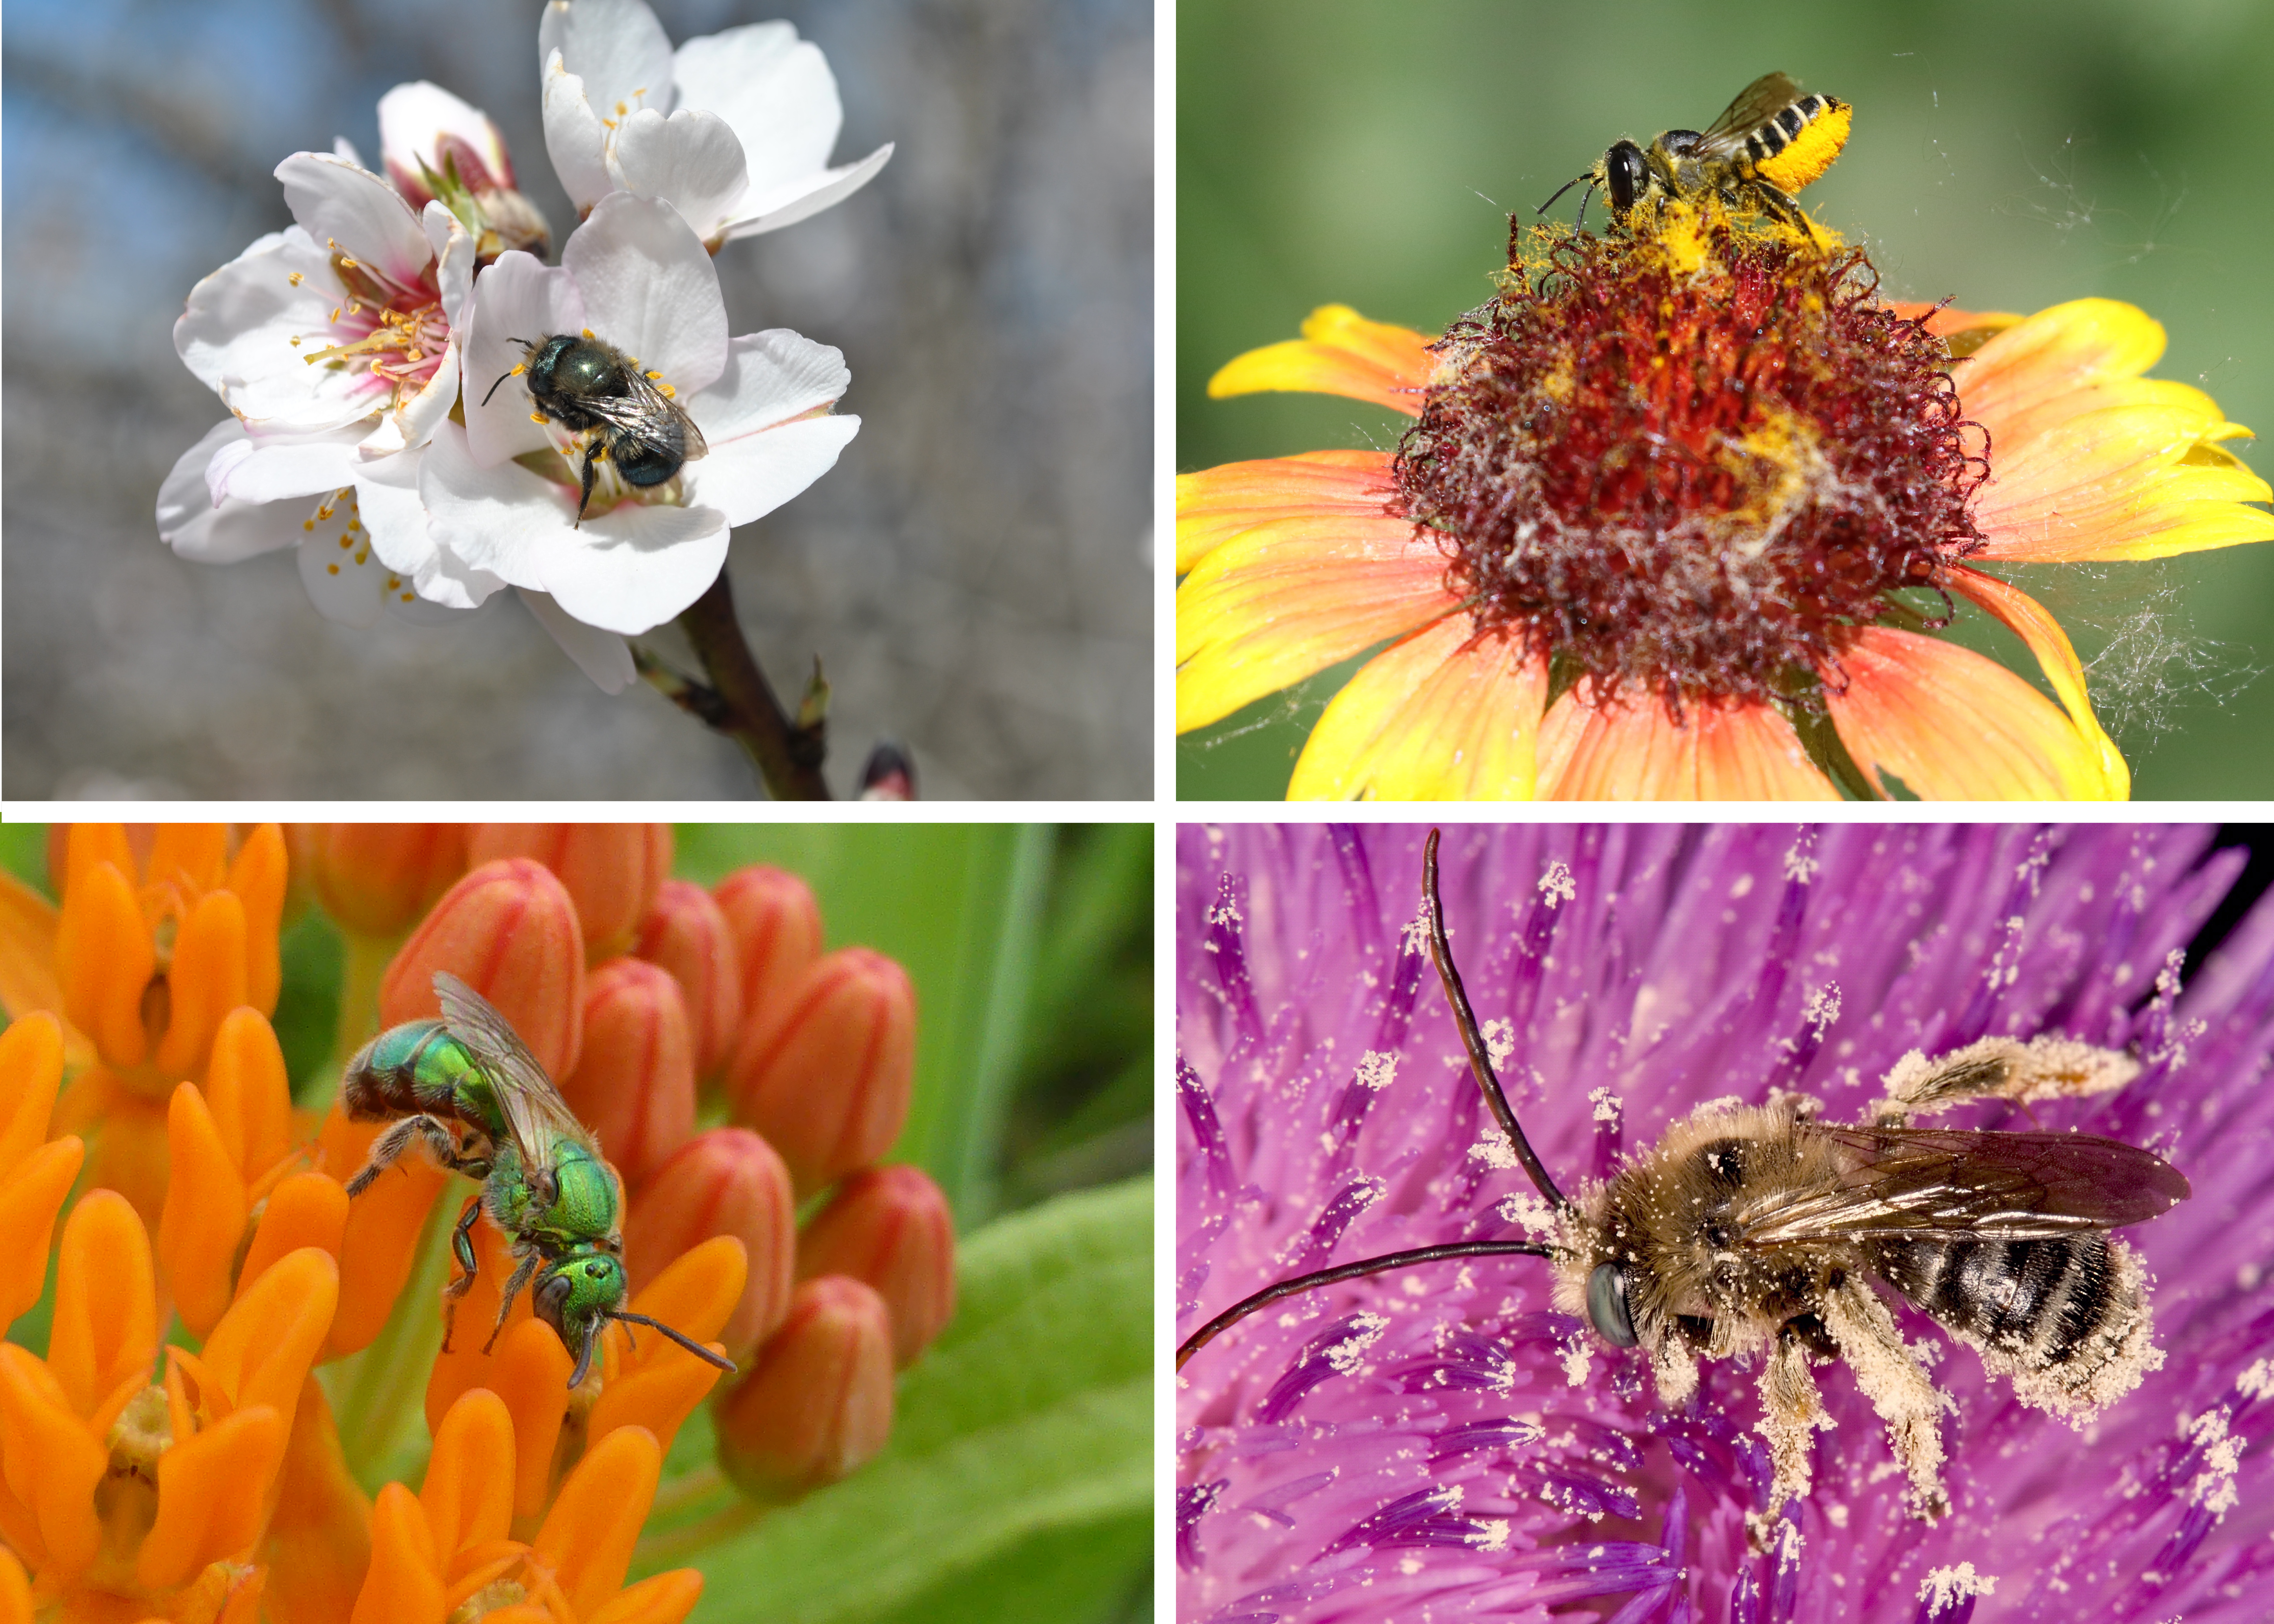 Brightly colored images of a diversity of bee species are shown in this grid.